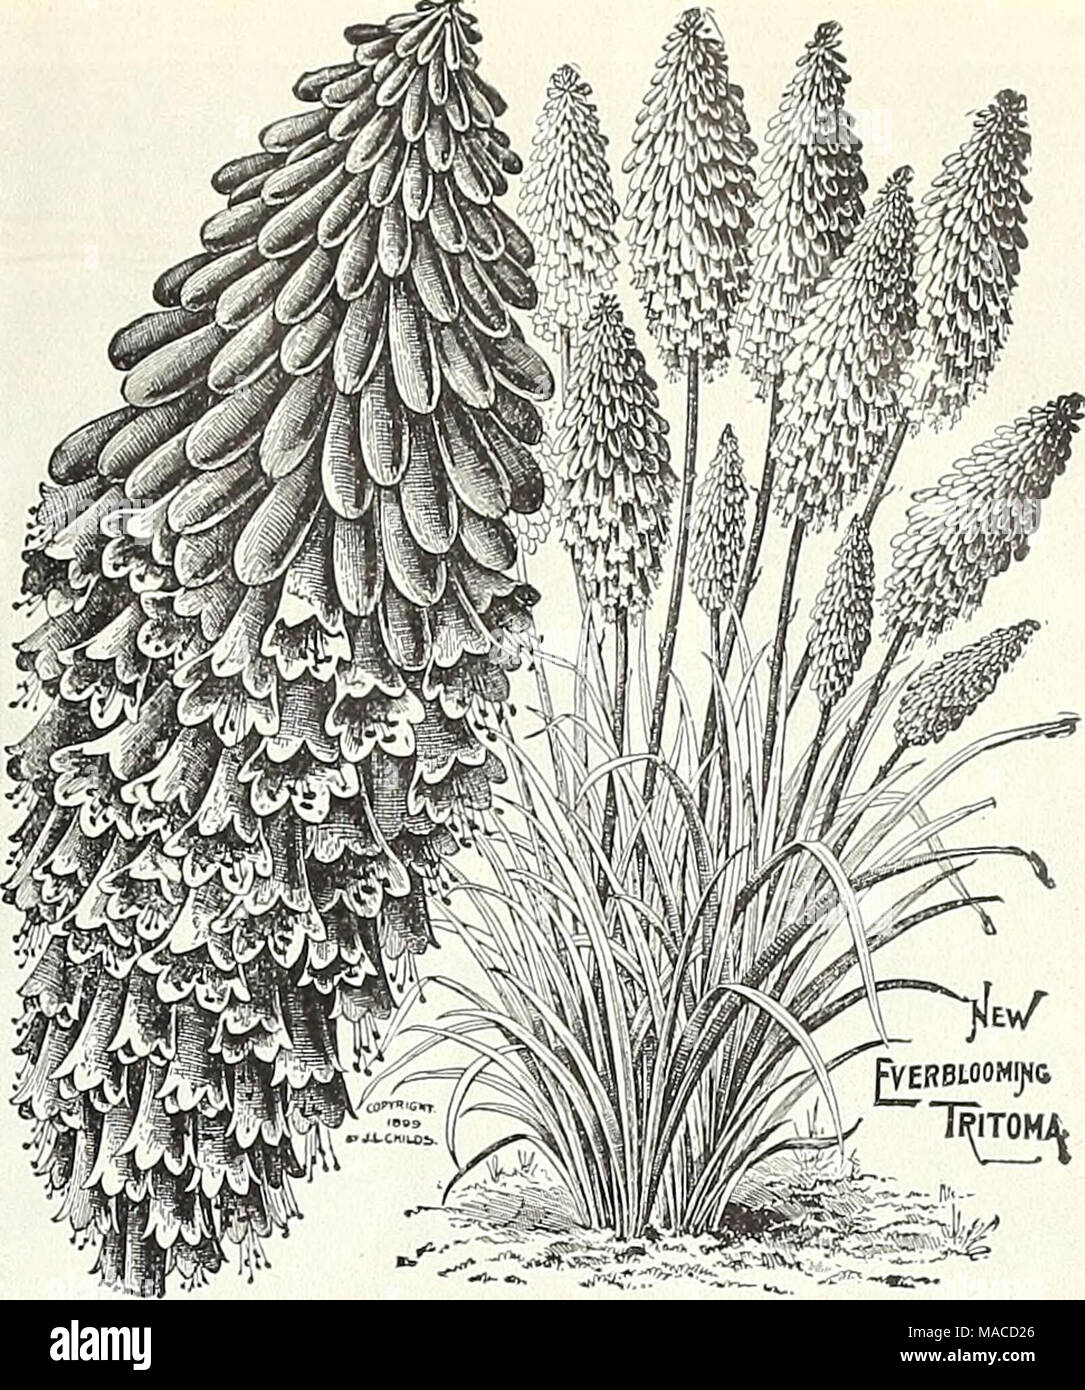 . Dreer's wholesale price list : seeds for florists plants for florists bulbs for florists vegetable seeds, fungicides, fertilizers, implements, insecticides, sundries, etc . TRITOMA PFITZERII (Red Hot Poker Plant) Tiarella. (Foam Flower.) Per doi. Per 100 Cordifolia. 3-inch pots $1 25 $9 00 Purpurea Major. 4-inch pots i 25 8 00 Tricyrtis. (Japanese Toad Lily.) Hirta. 3-inch pots i 25 8 00 Macropoda Striata. 3-inch pots i 25 8 00 Tunica. Saxifraga. 3-inch pots i 00 7 00 Valeriana. (Valerian.) Coccinea. 4-inch pots i 25 8 00 &quot; Alba. 4-inchpots i 25 8 00 Officinalis. 3-inch pots i 25 8 00 V Stock Photo